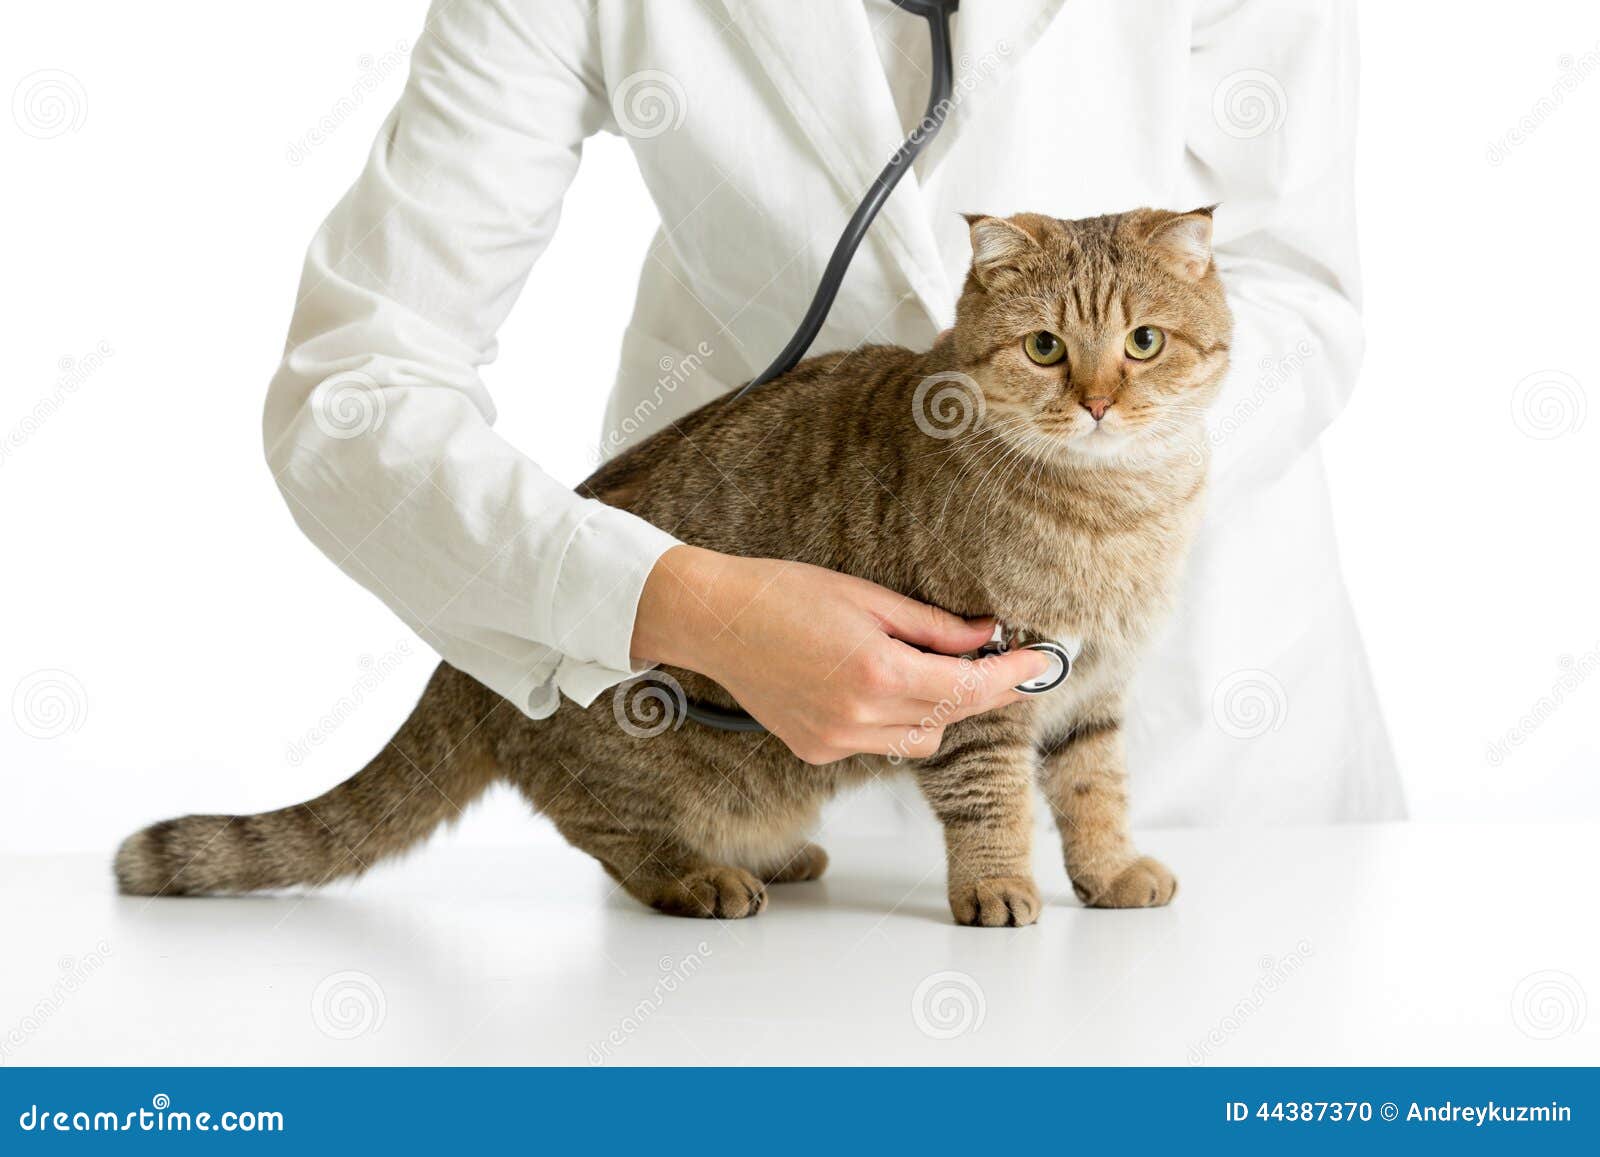 veterinary doctor with stethoscope and cat